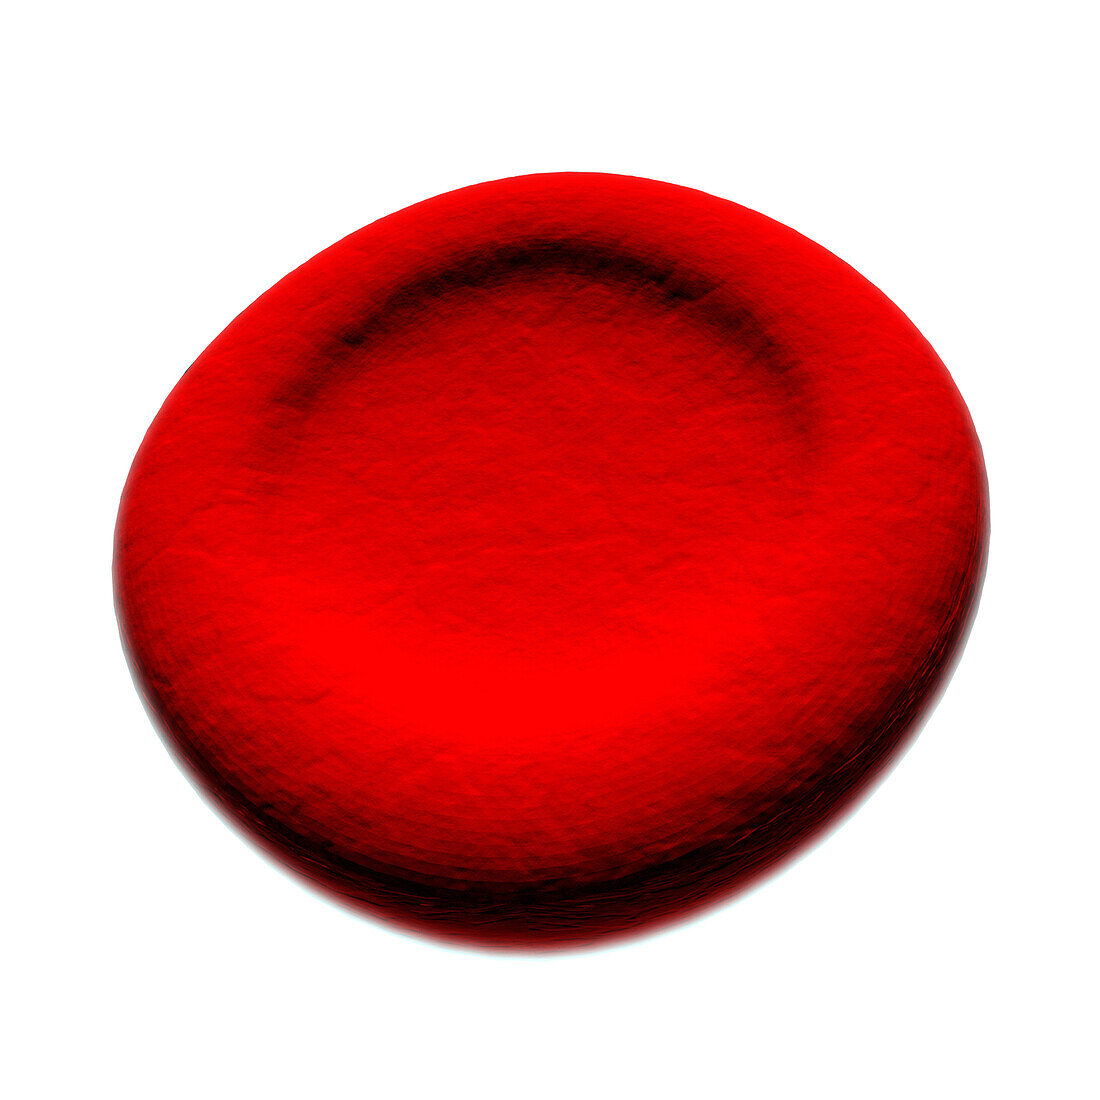 Macrocyte abnormal red blood cell, illustration